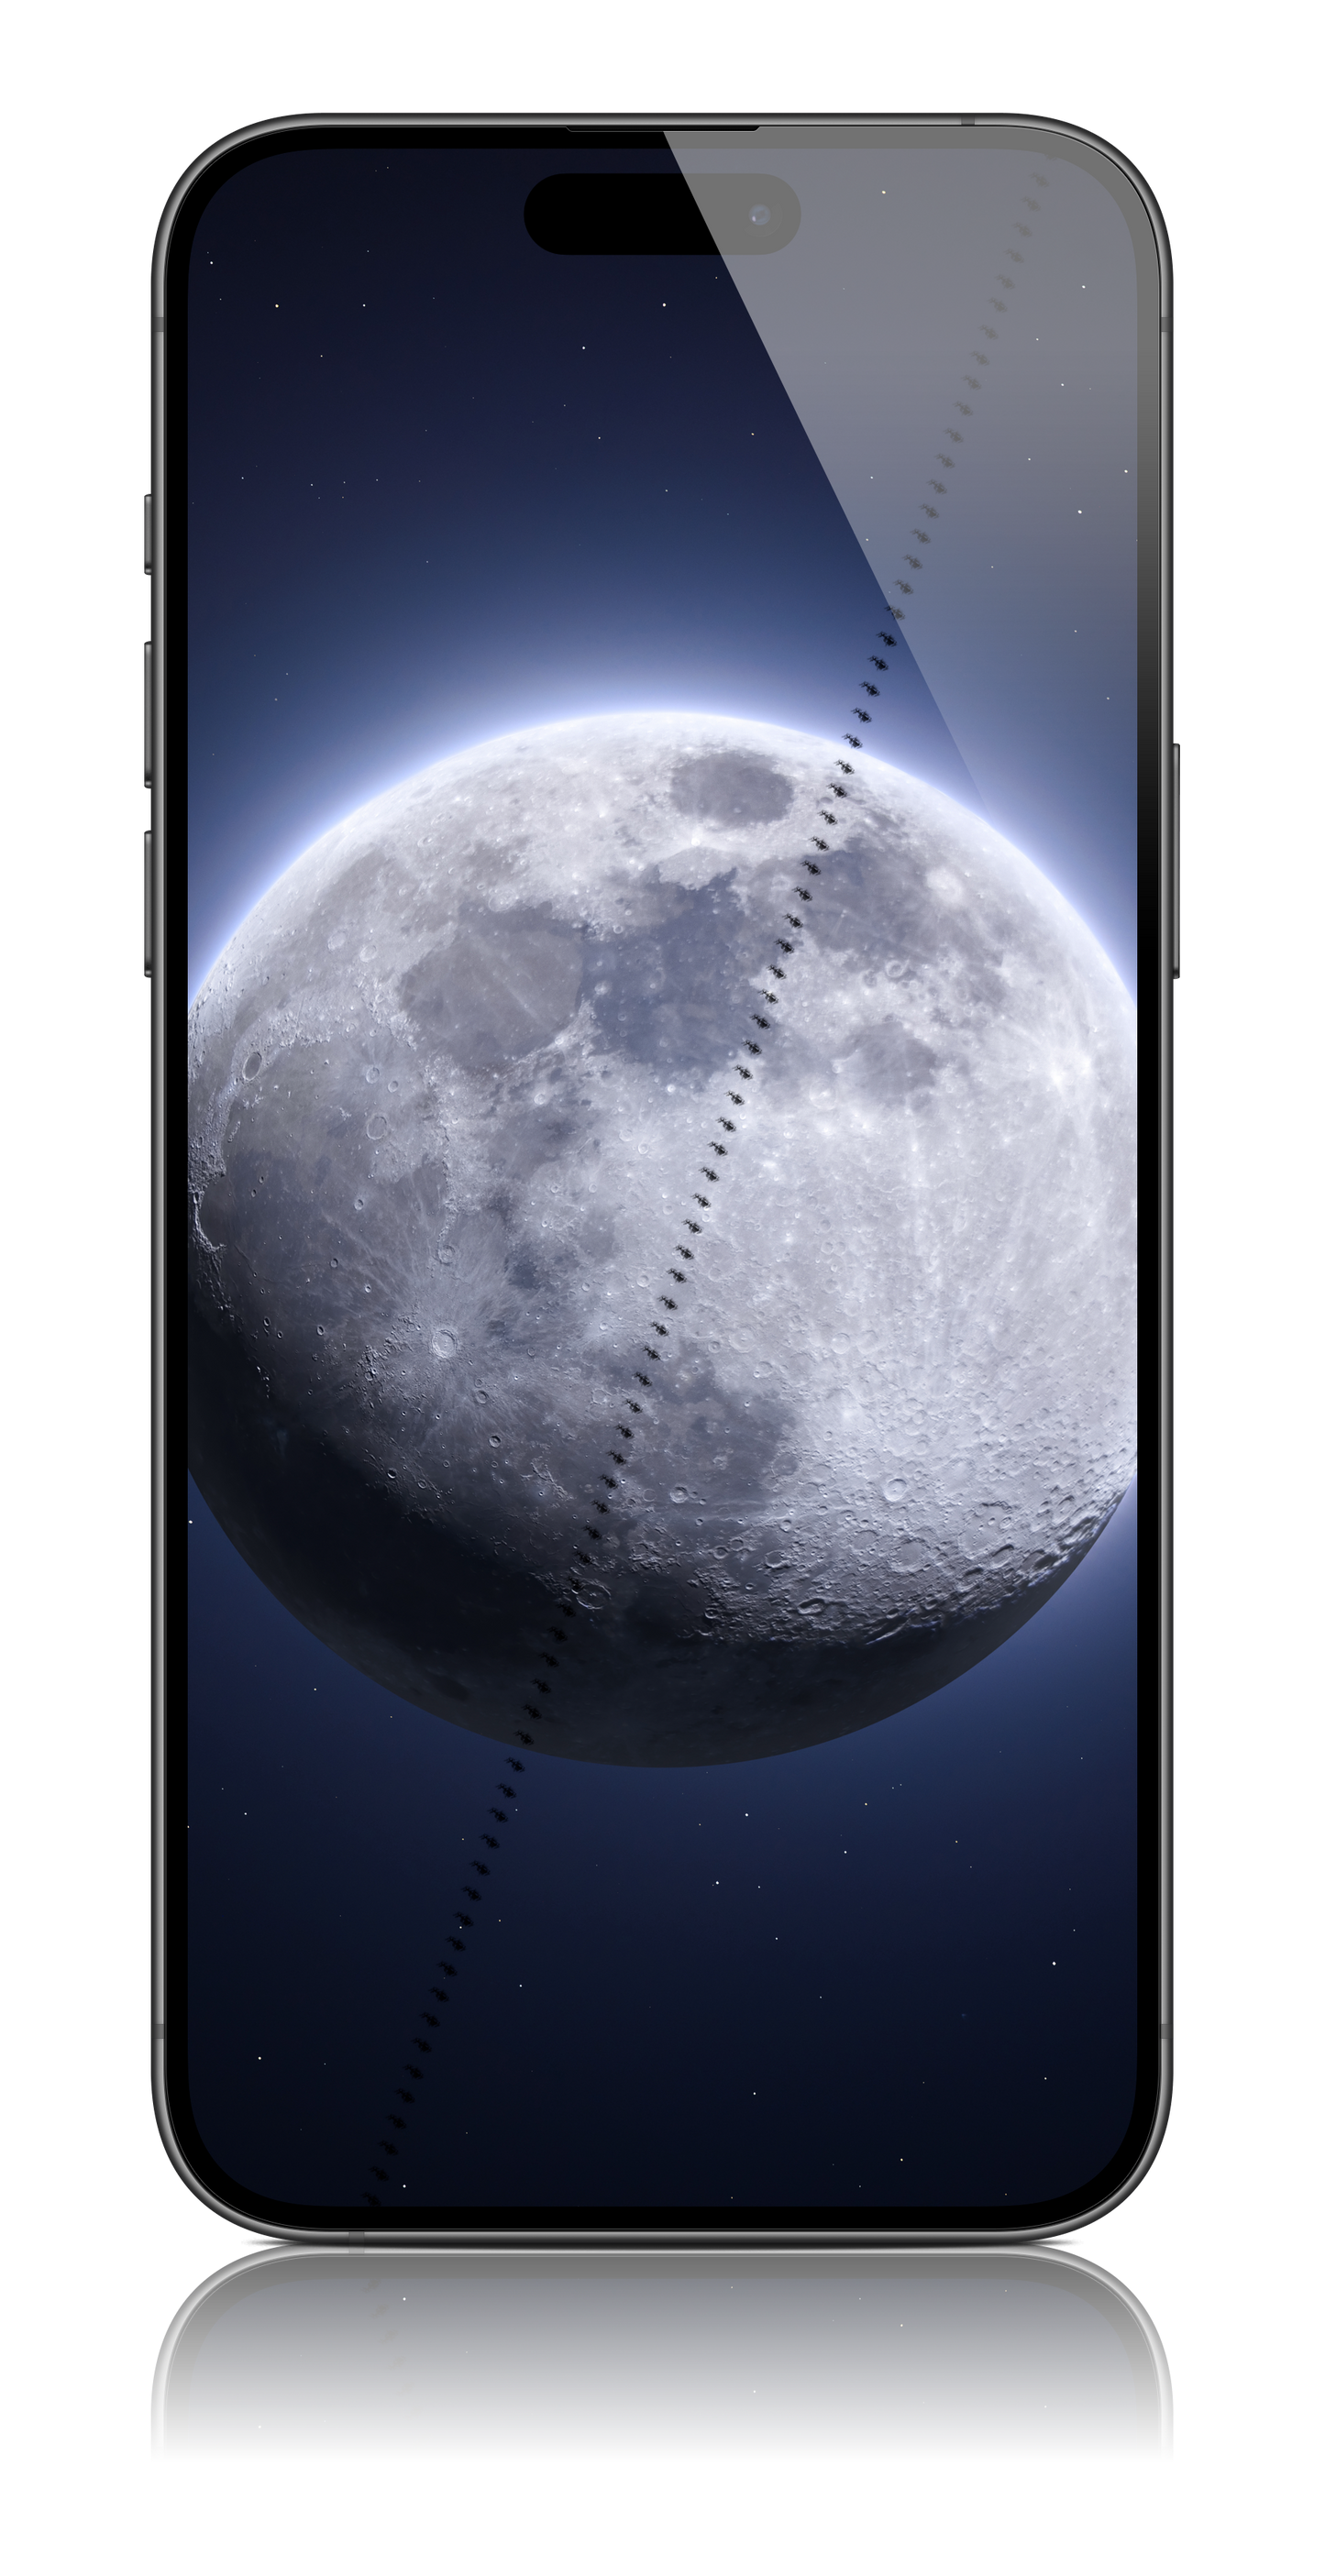 ISS Meets Moon March 21st 2024 Wallpaper Bundle